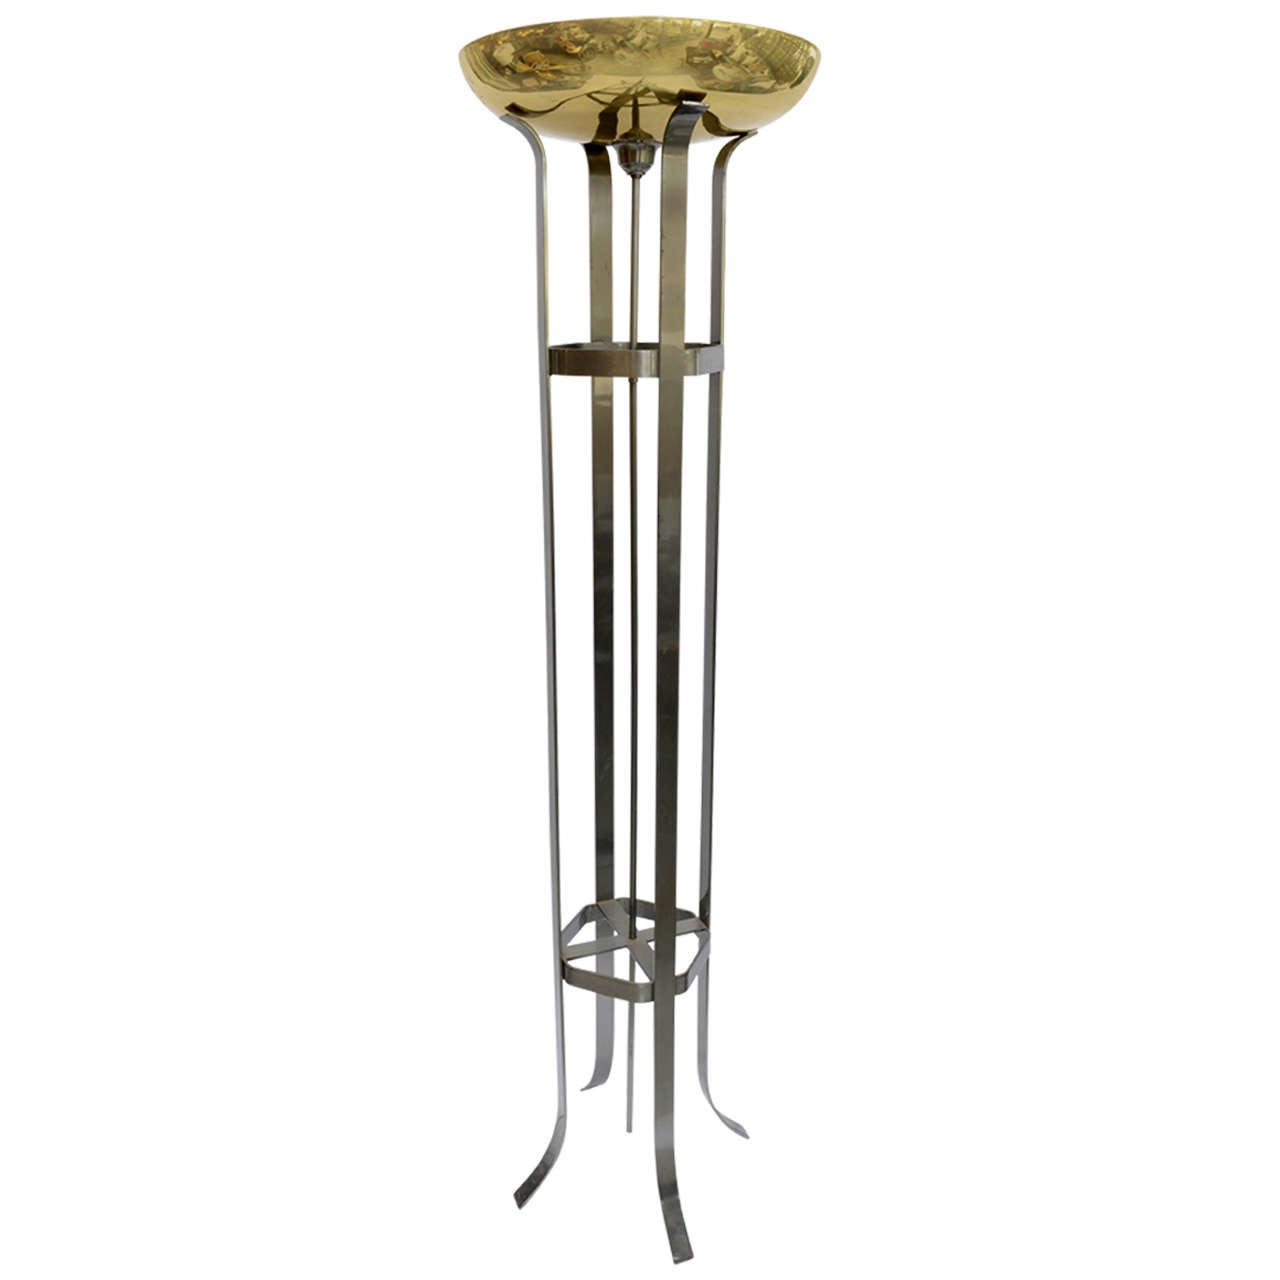 Vintage Steel and Brass Torchiere Floor Lamp